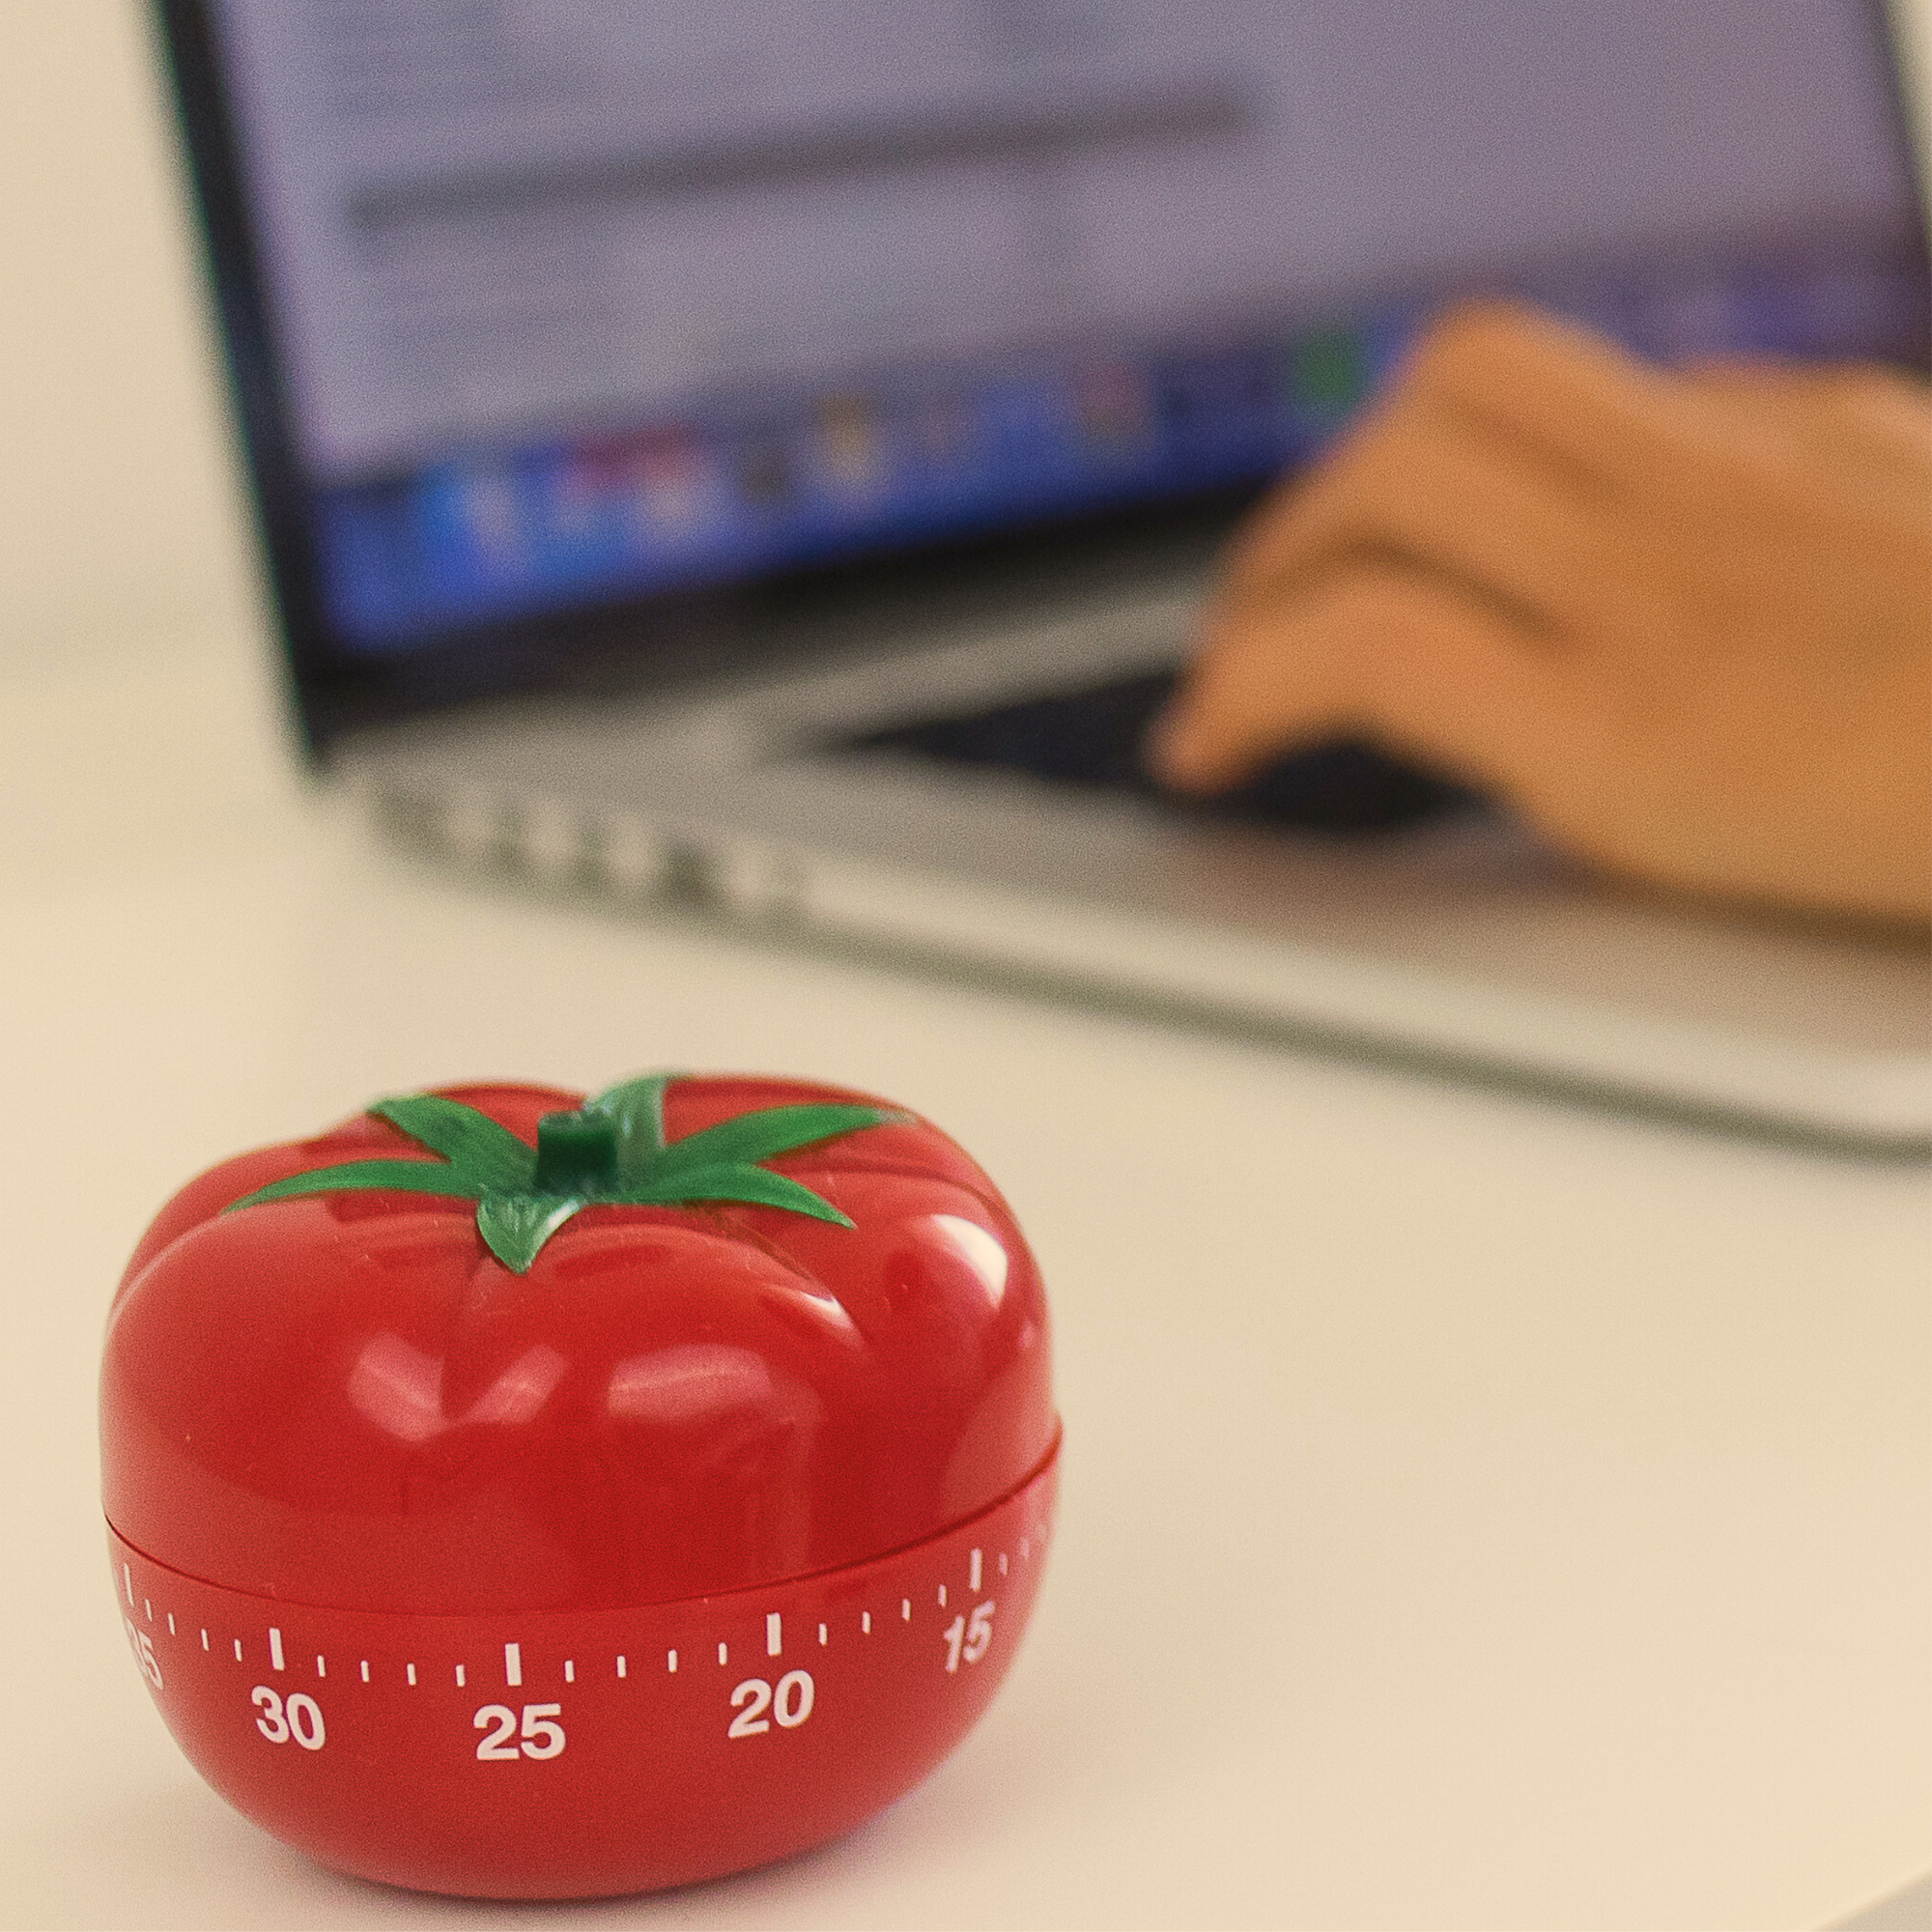 Pomodoro Timer Near Person Working On Laptop